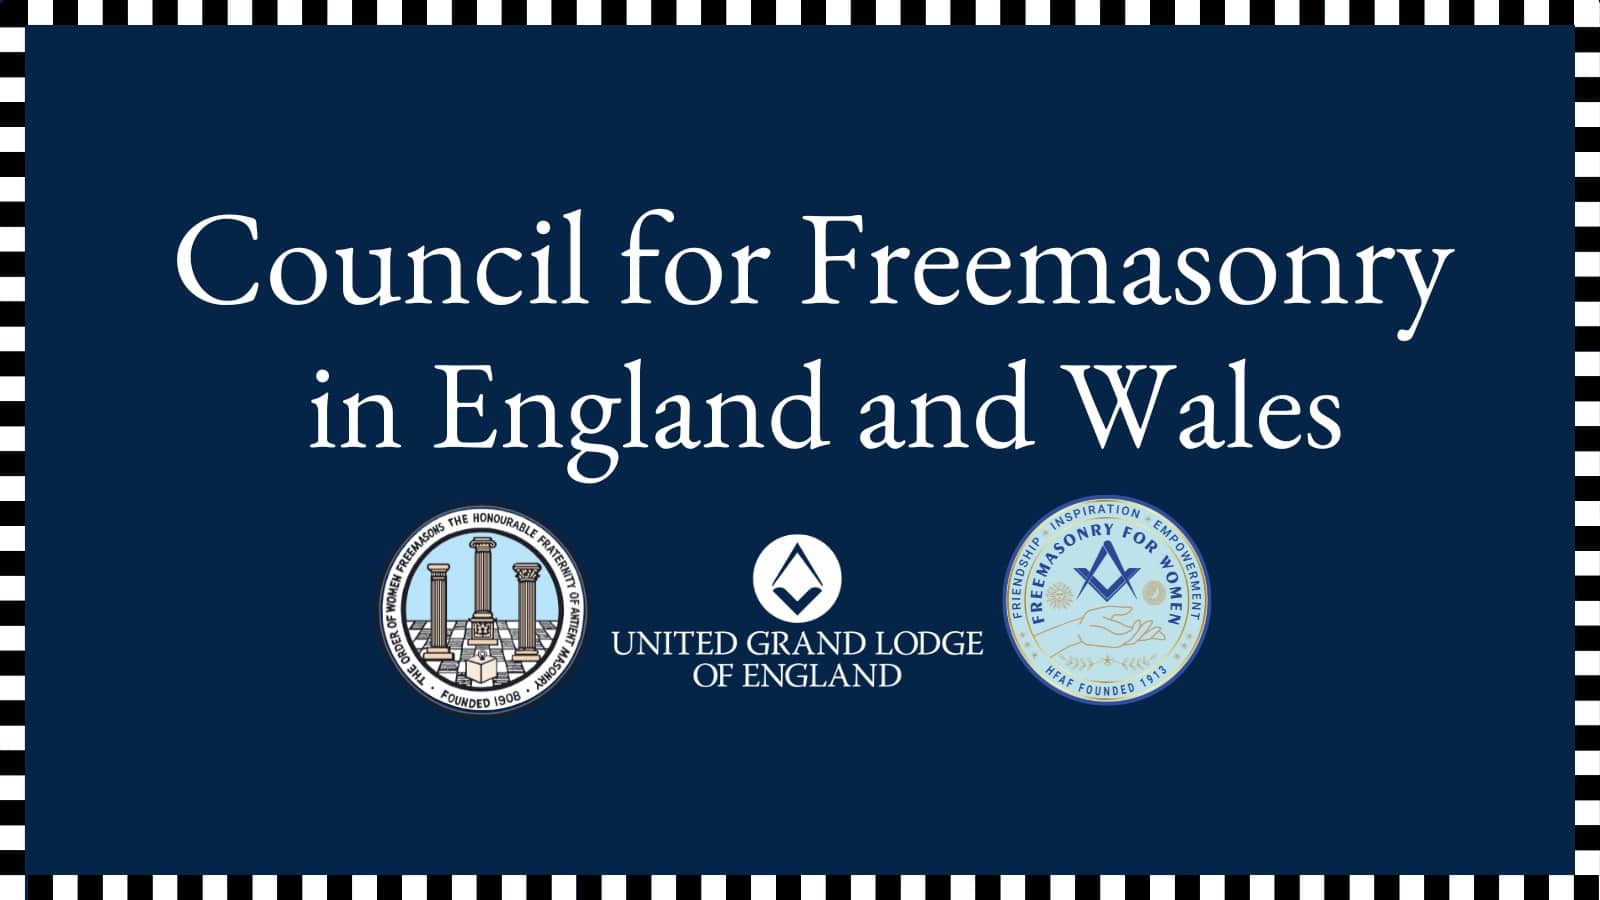 Council for Freemasonry in England and Wales